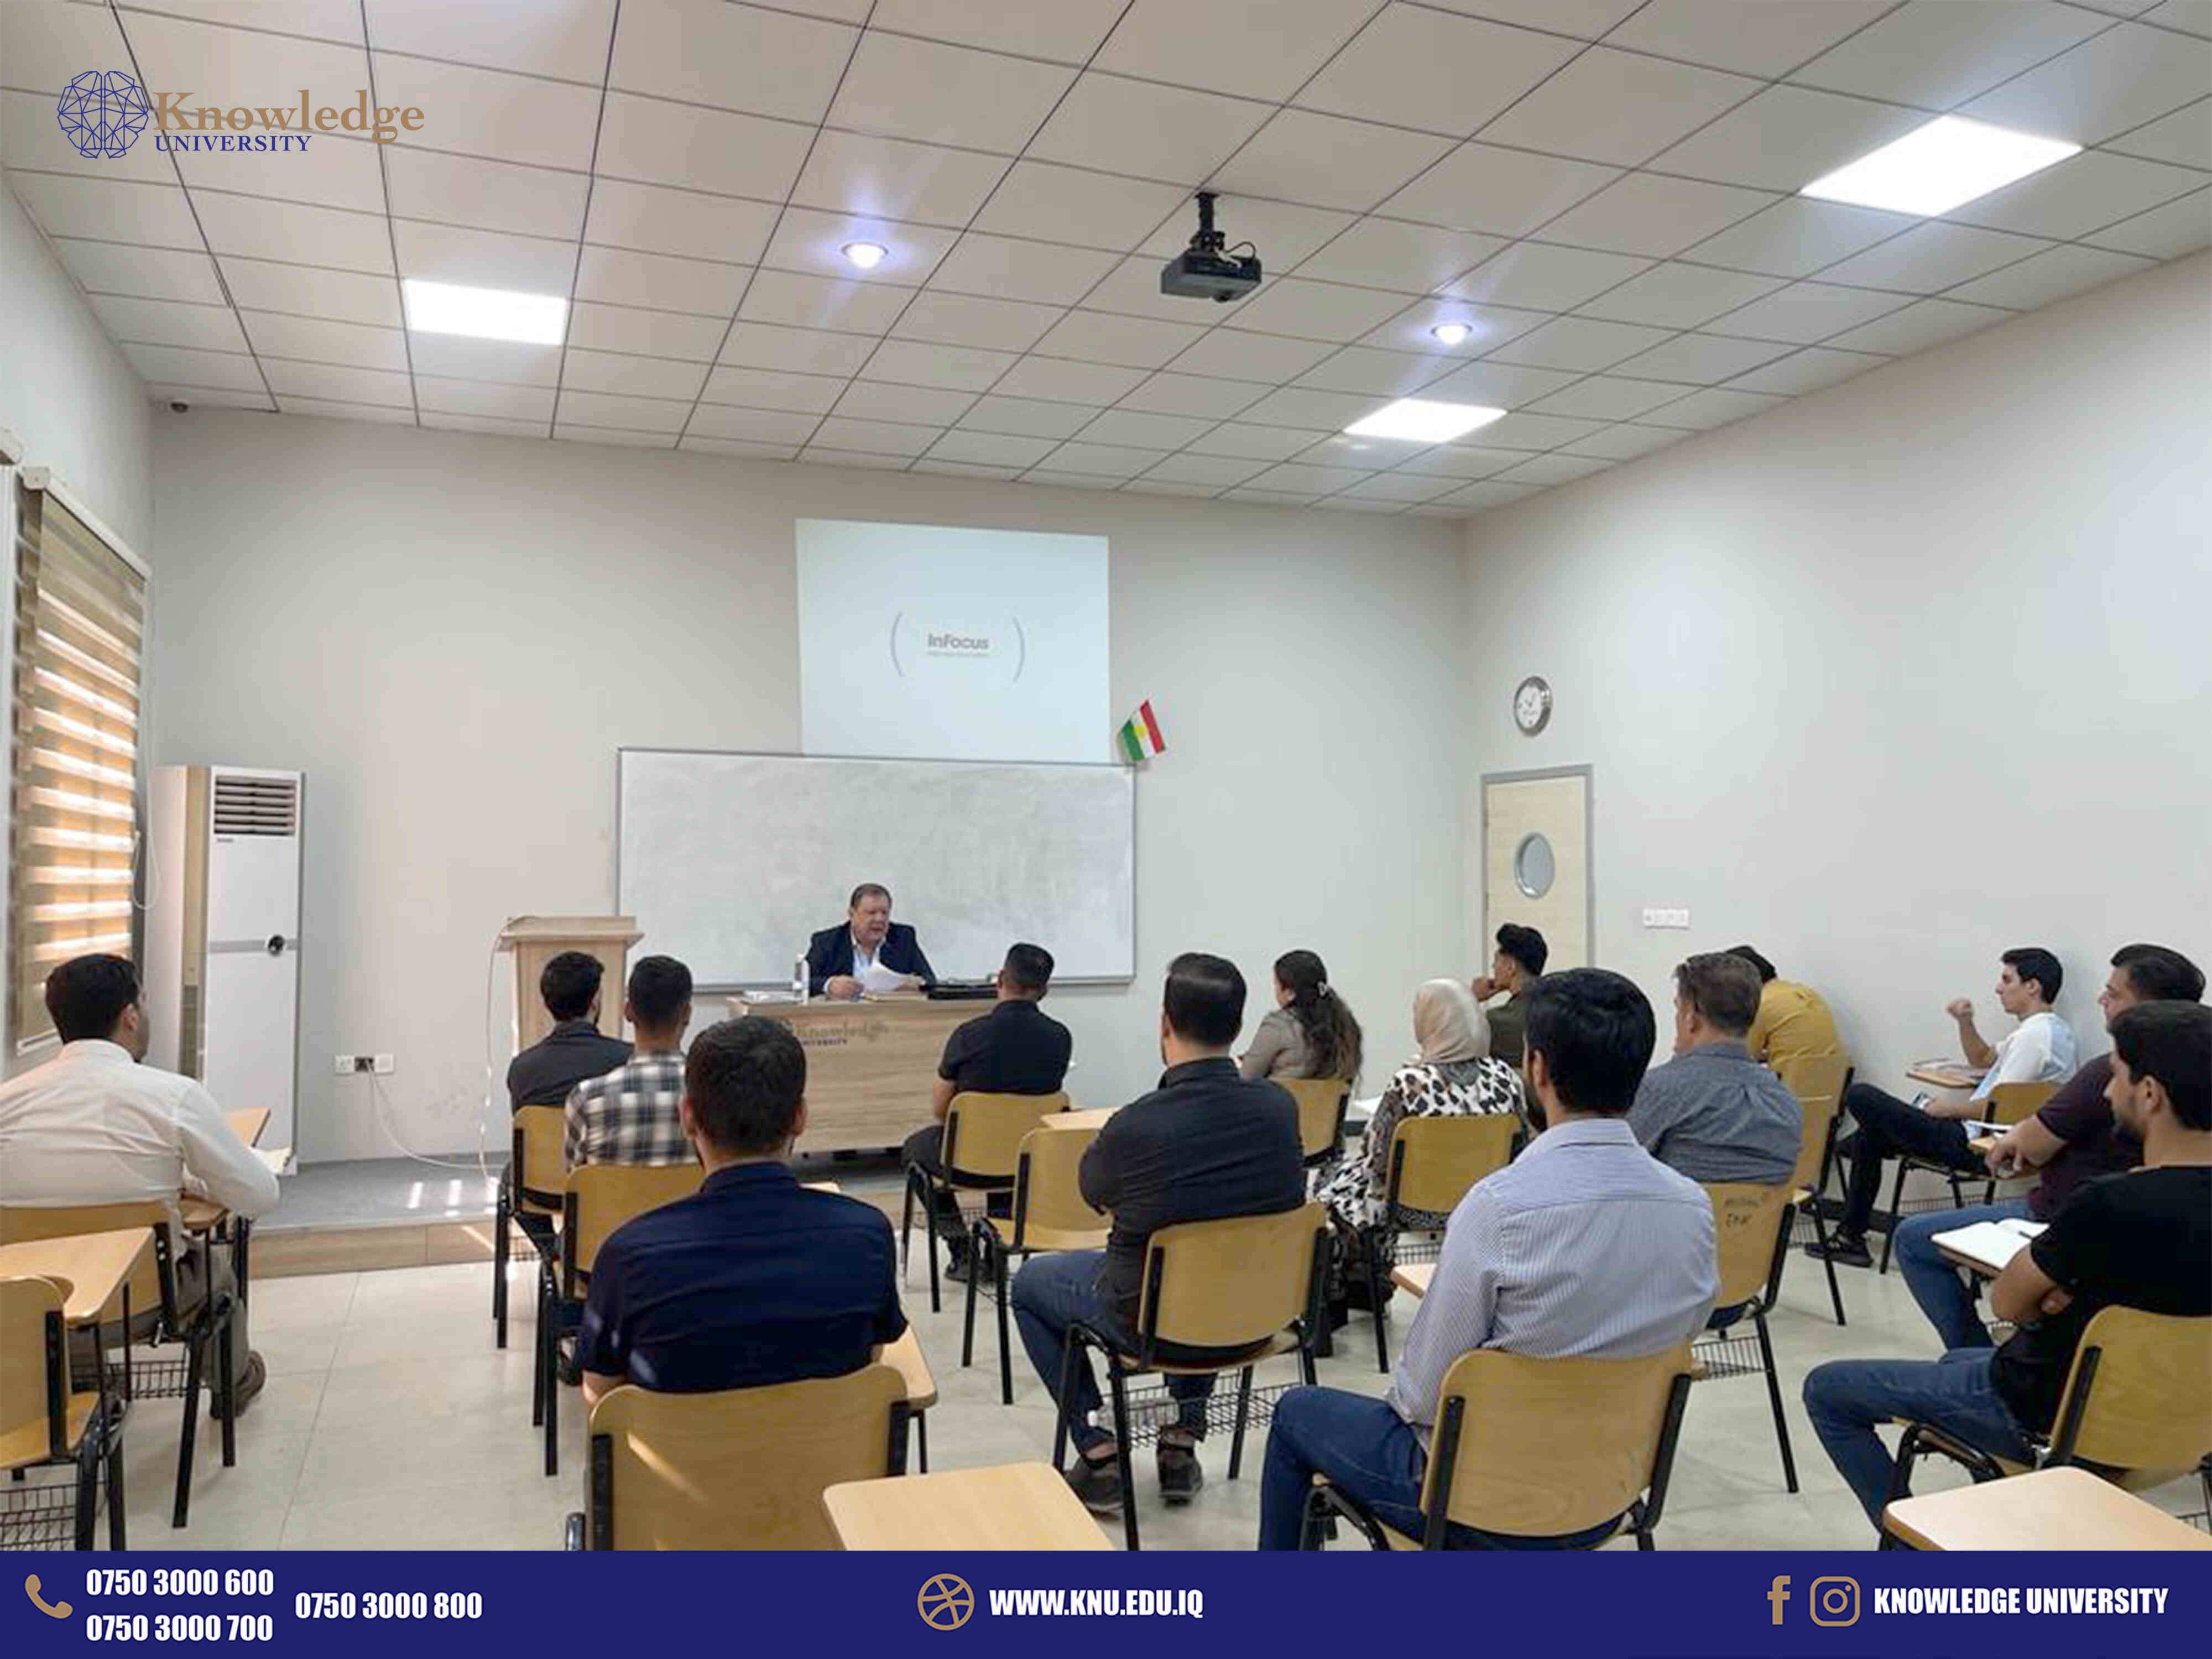 Department of Law Hosts Insightful Lecture Series by Retired Judge Gaylani Syed Ahmad